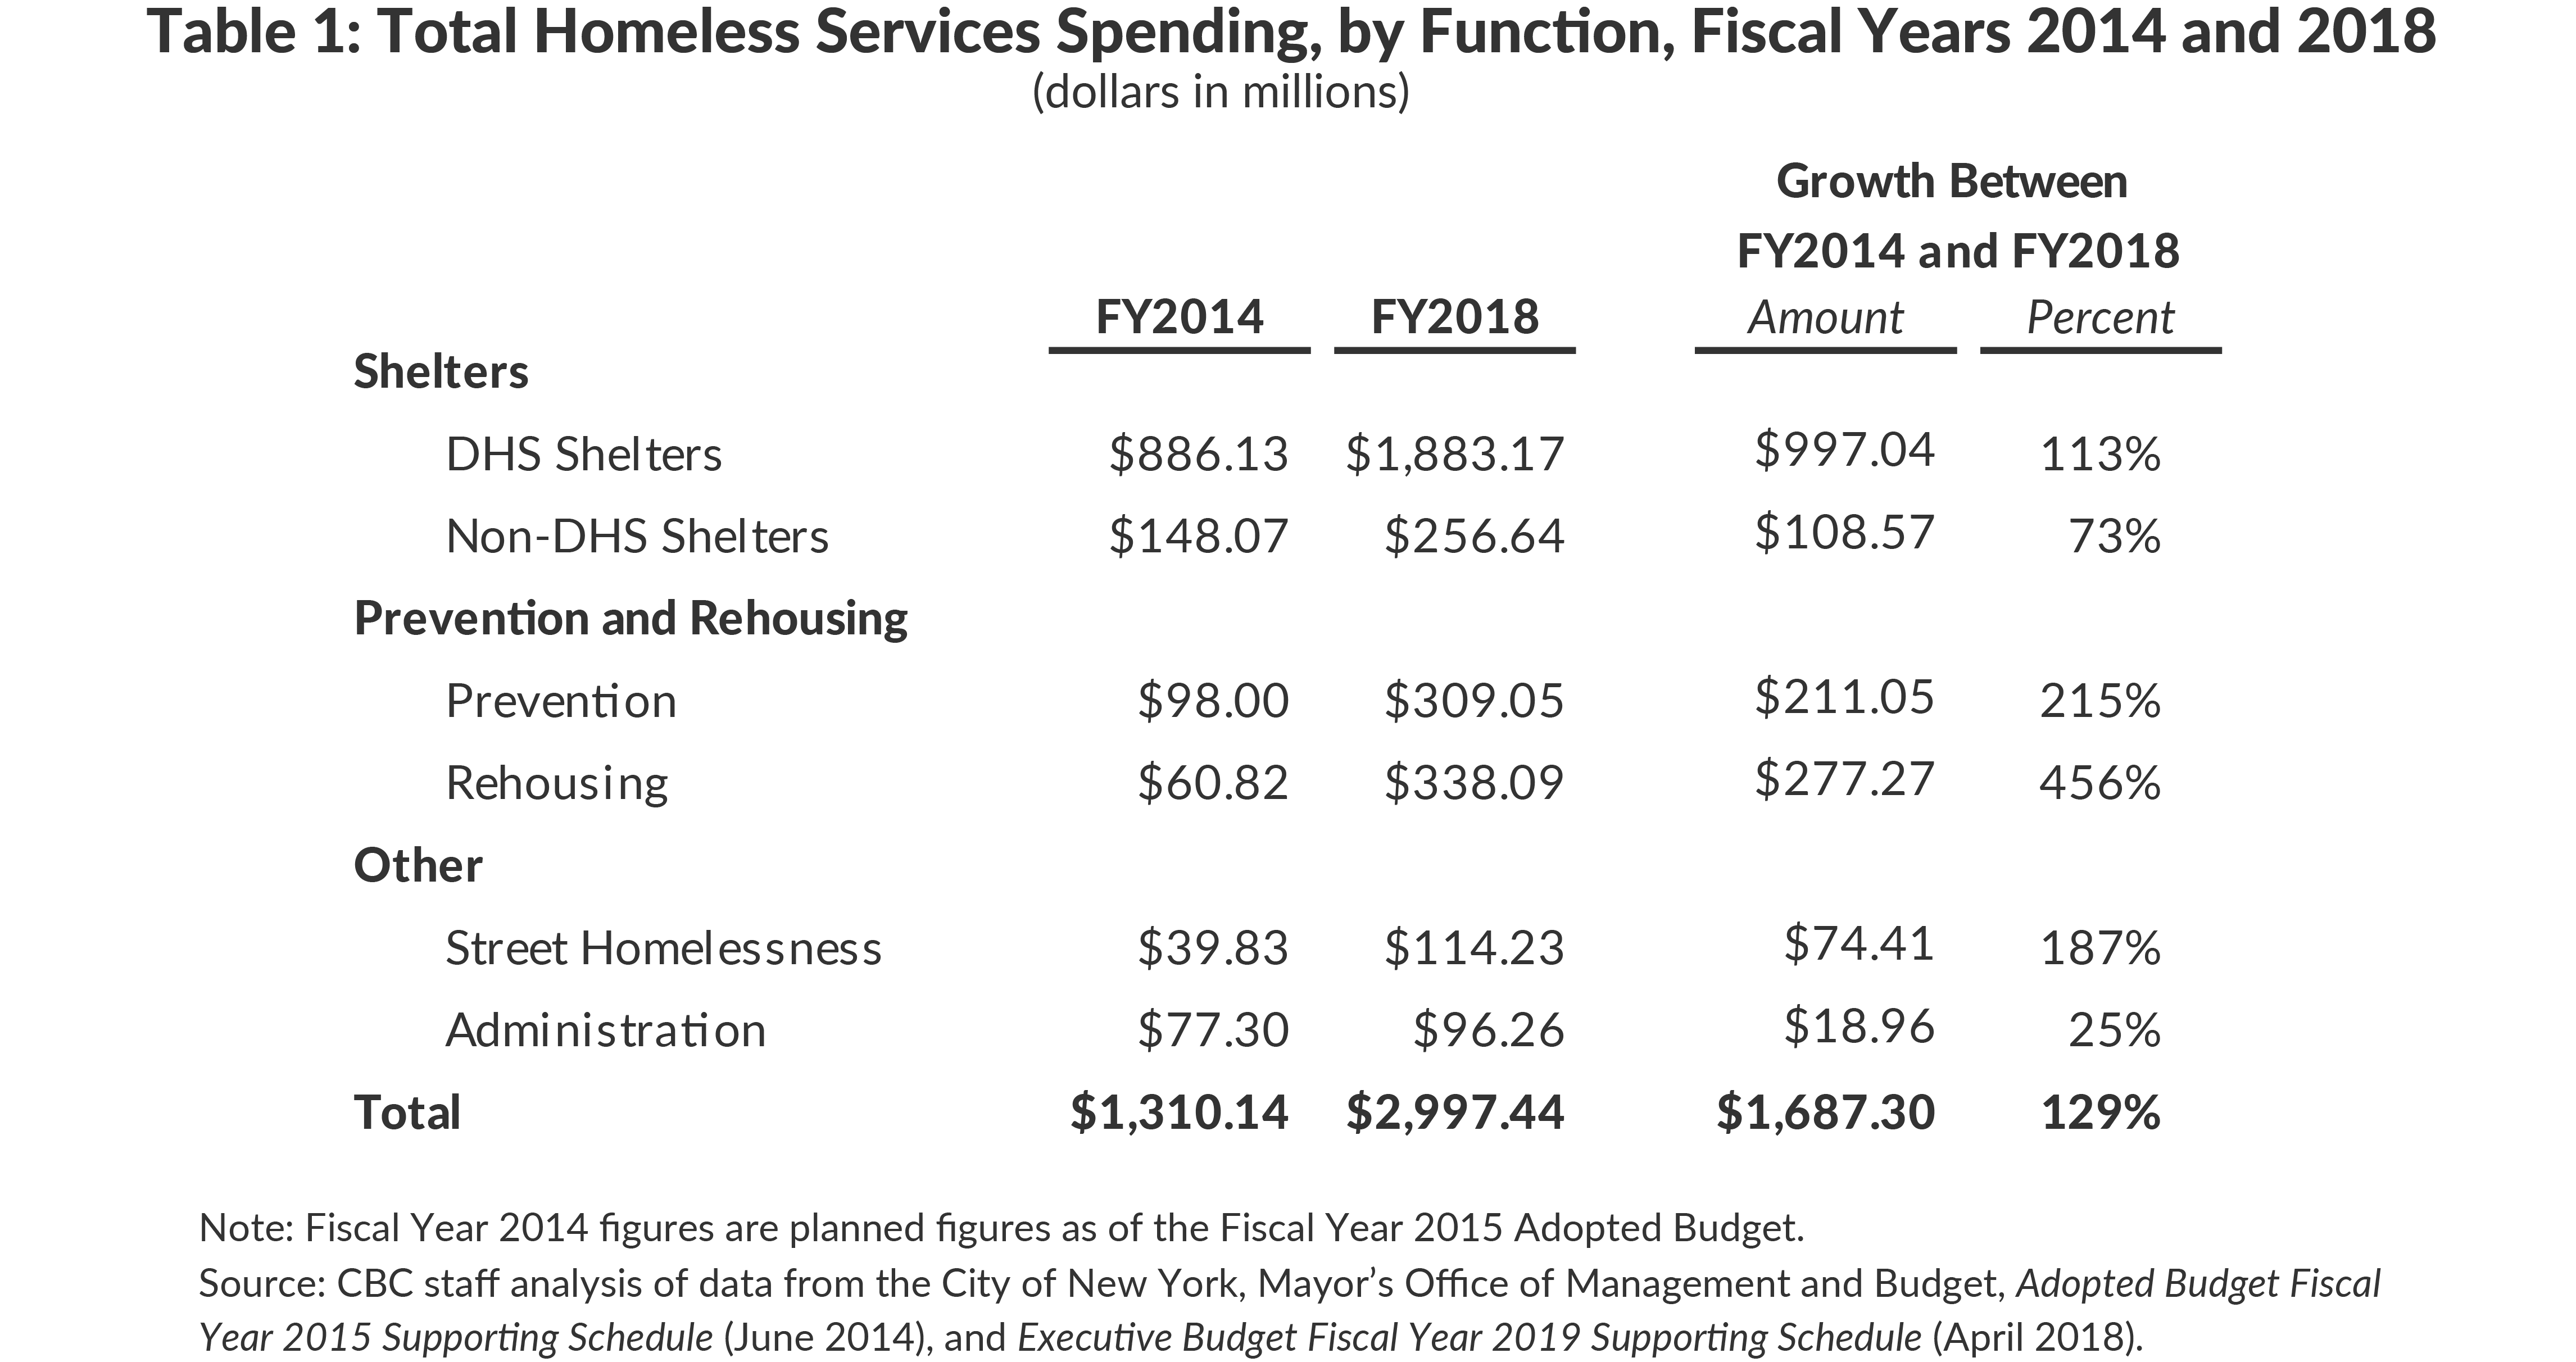 Total Homeless Services Spending, by Function, Fiscal Years 2014 and 2018